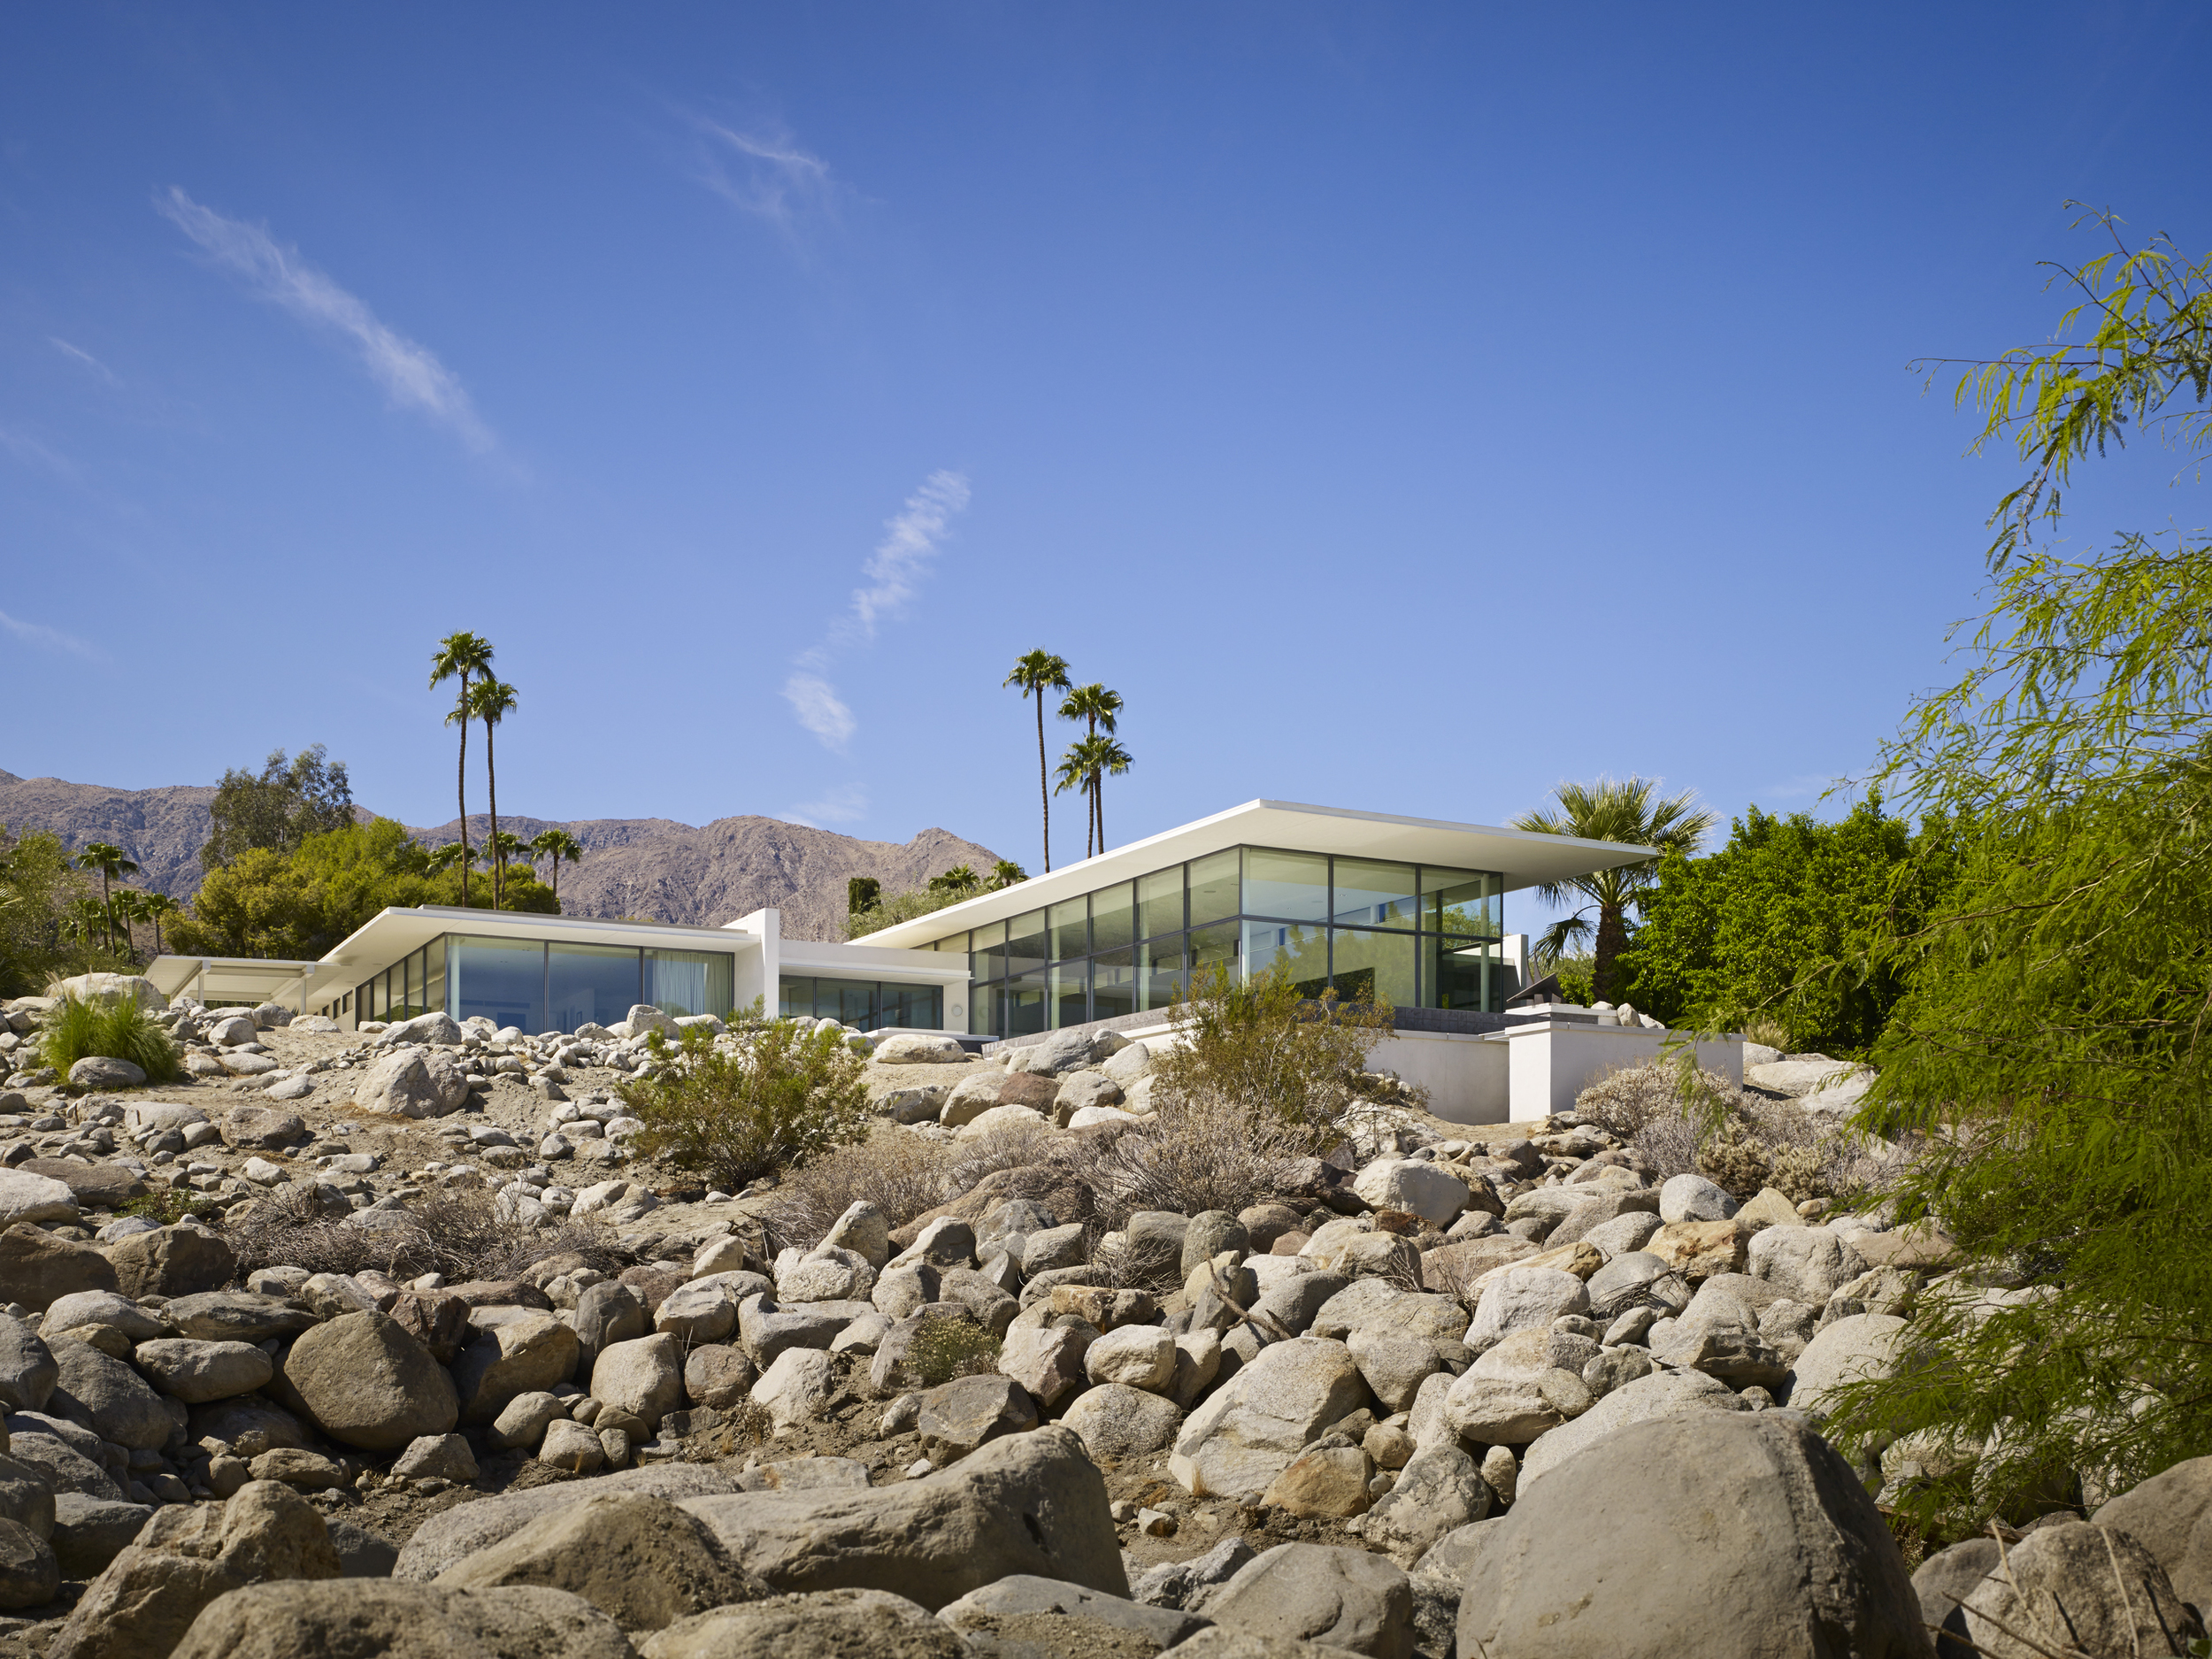  PUBLICATIONS   Western Art and Architecture, &nbsp;Cover story     Panorama House  Booth Hansen Architects  Palm Springs, CA      Return to Projects  